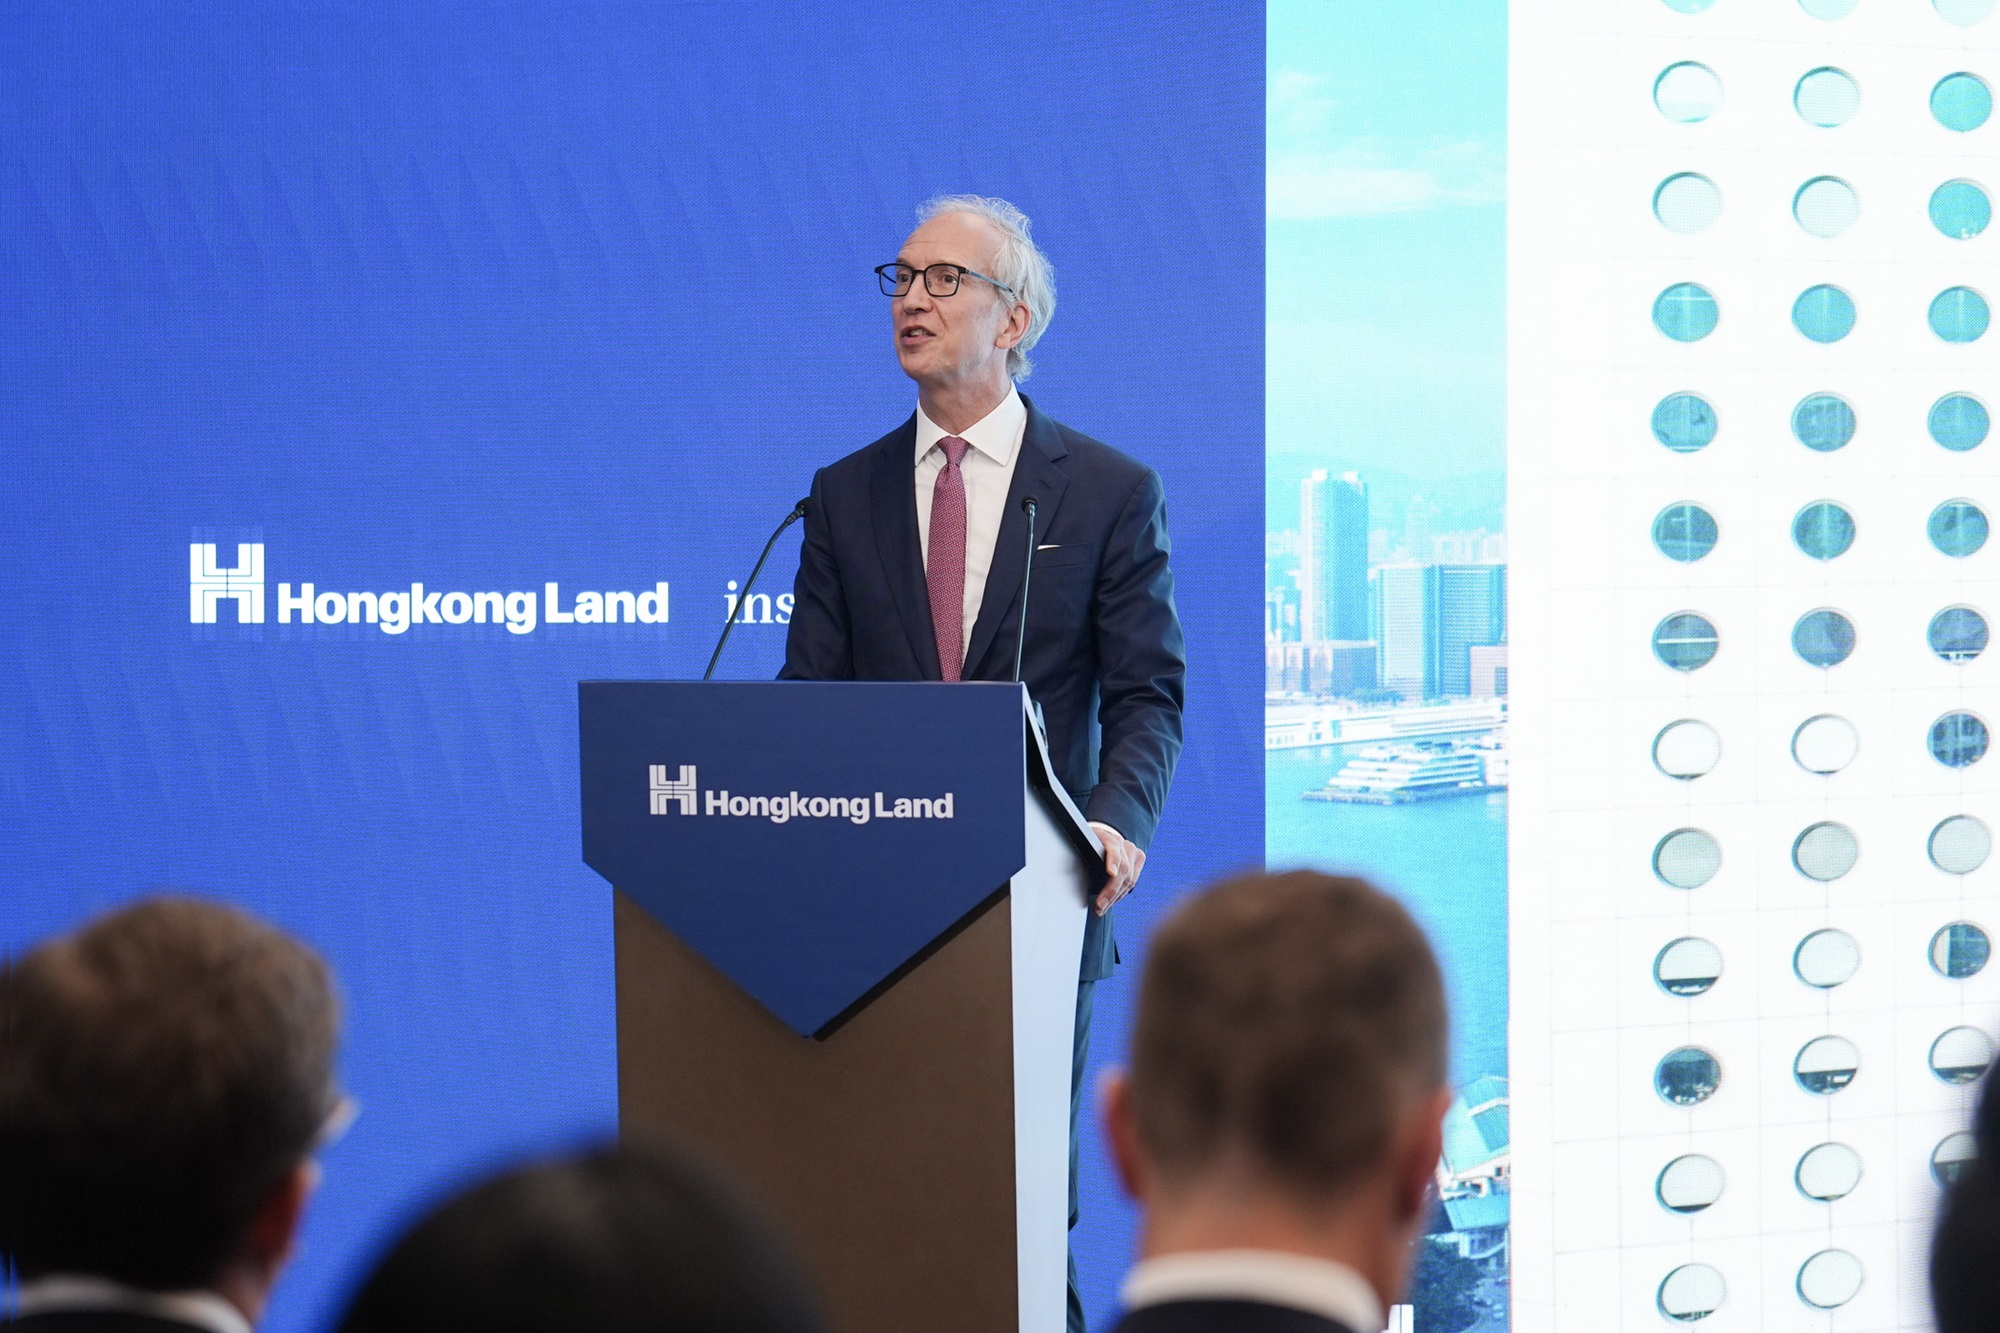 John Witt, Group Managing Director of Jardine Matheson, welcomes Hongkong Land’s transformative project, which will cement Central’s status as a world-class retail, dining and business hub. The project aligns with Jardines’ long held drive to grow our businesses alongside our communities, with the vision to capture long-term opportunity.